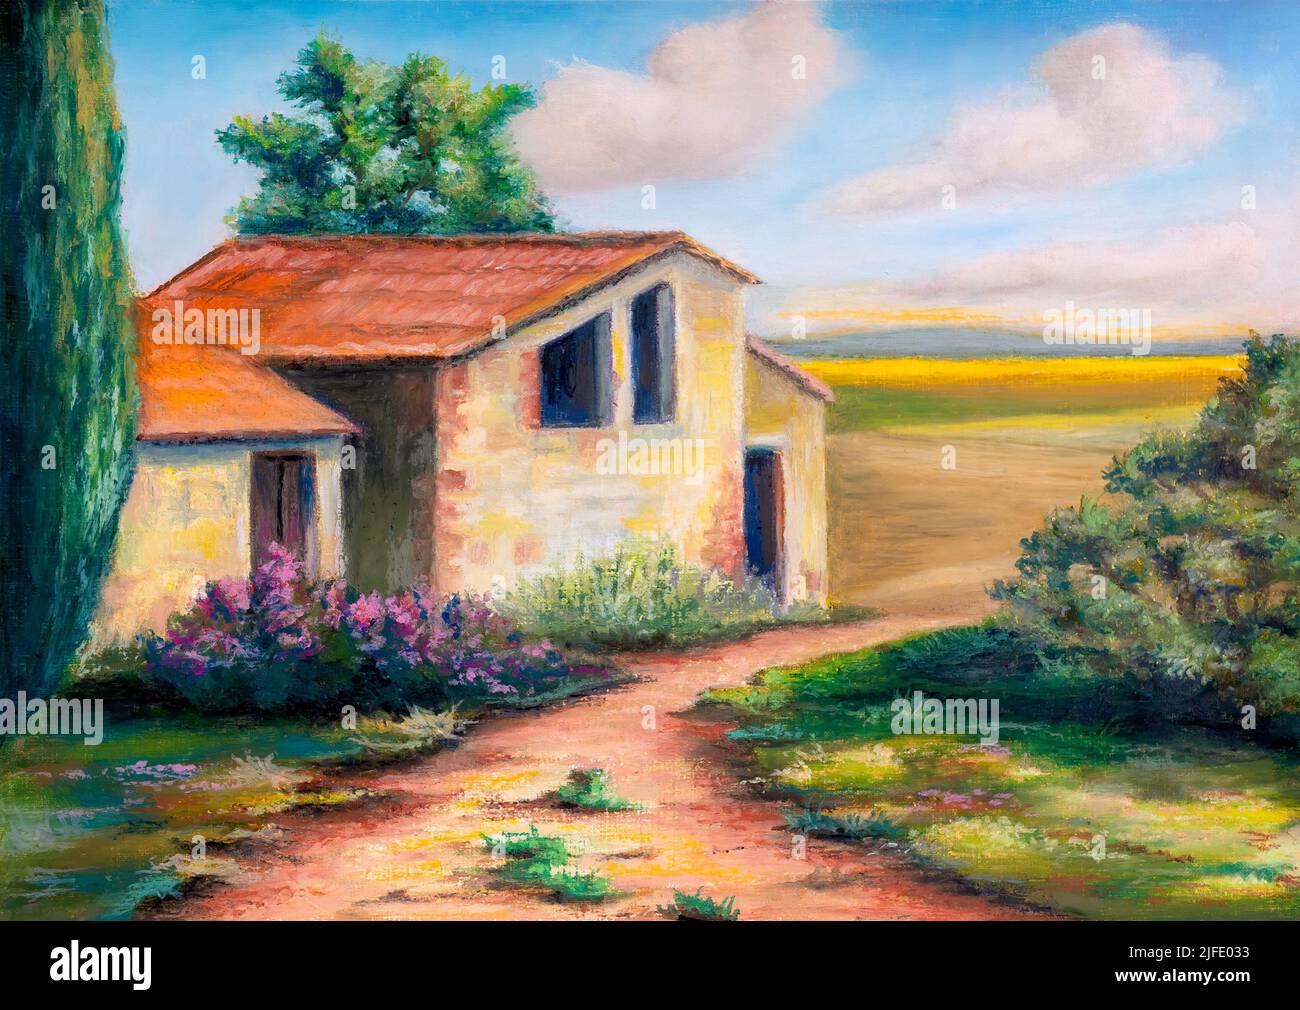 Rural buildings in a sunny landscape. Original painting on canvas. Stock Photo